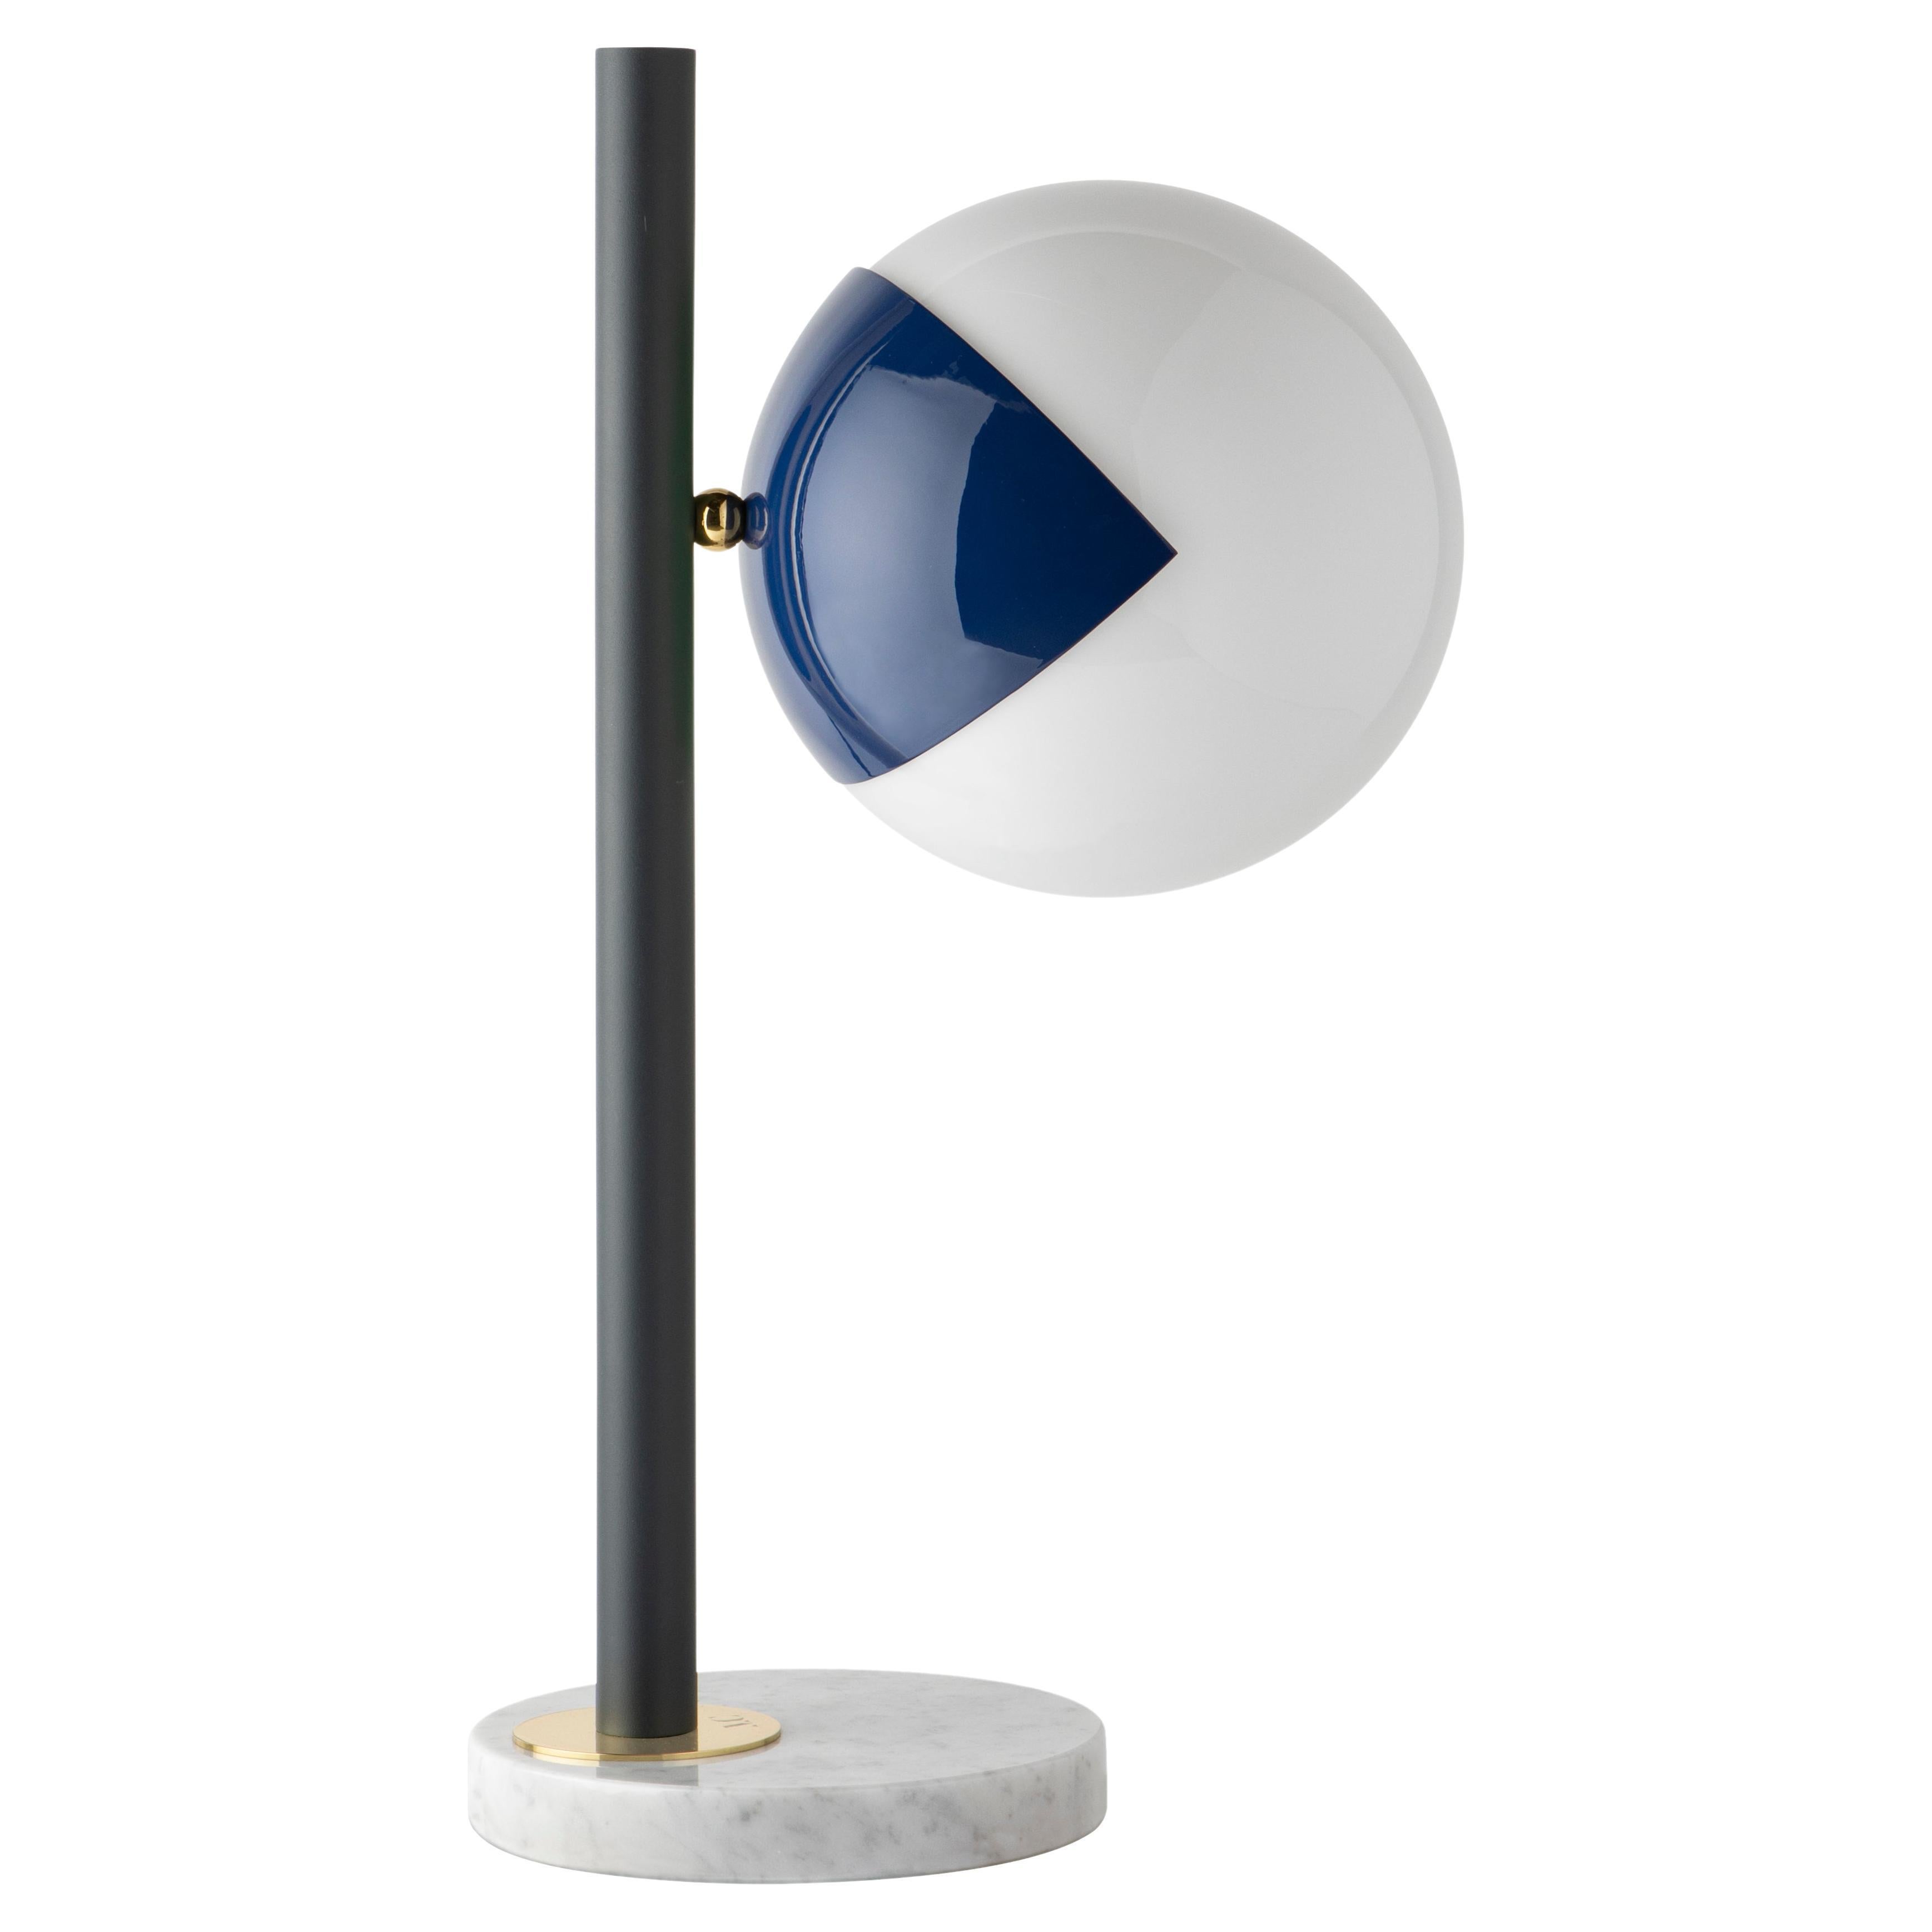 Green dimmable table lamp Pop-Up black by Magic Circus Editions
Dimensions: Ø 22 x 30 x 53 cm 
Materials: Carrara marble base, smooth brass tube, glossy mouth blown glass

All our lamps can be wired according to each country. If sold to the USA